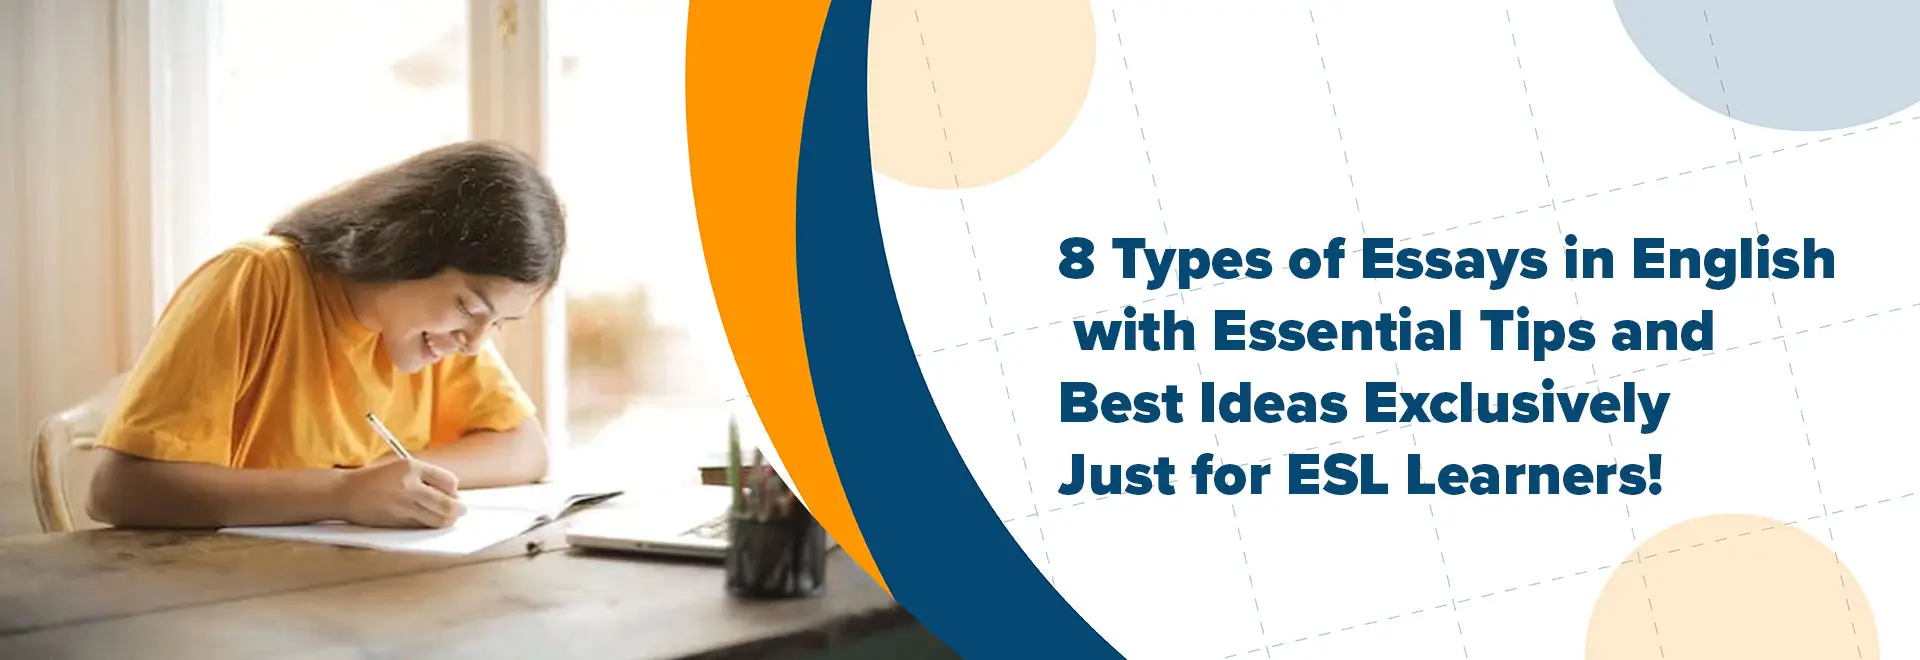 8 Types of Essays in English with Essential Tips and Best Ideas Exclusively Just for ESL Learners!